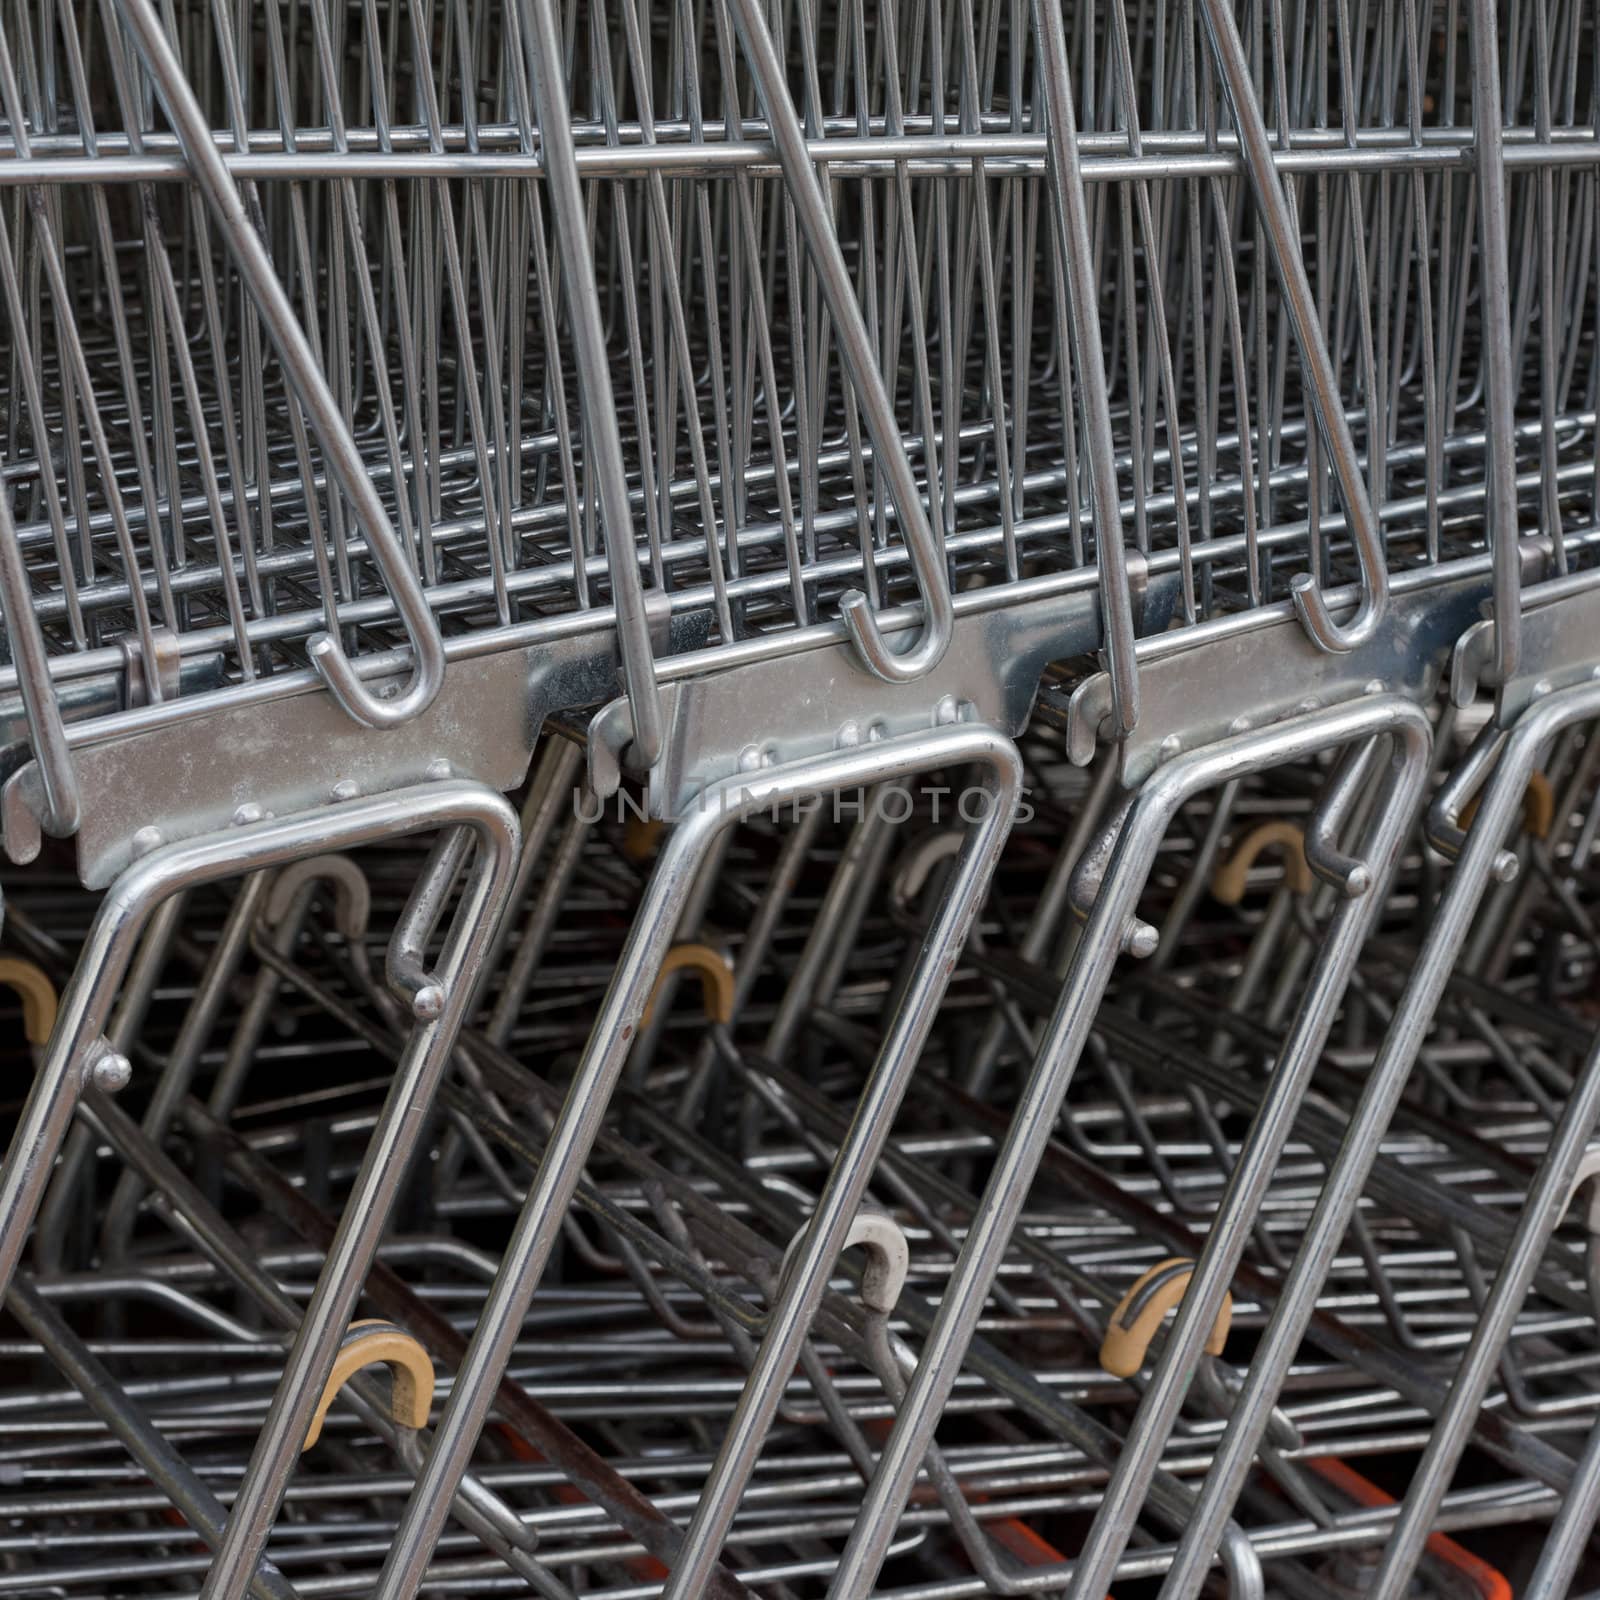 Detail of shiny metal shopping carts stacked in a row.